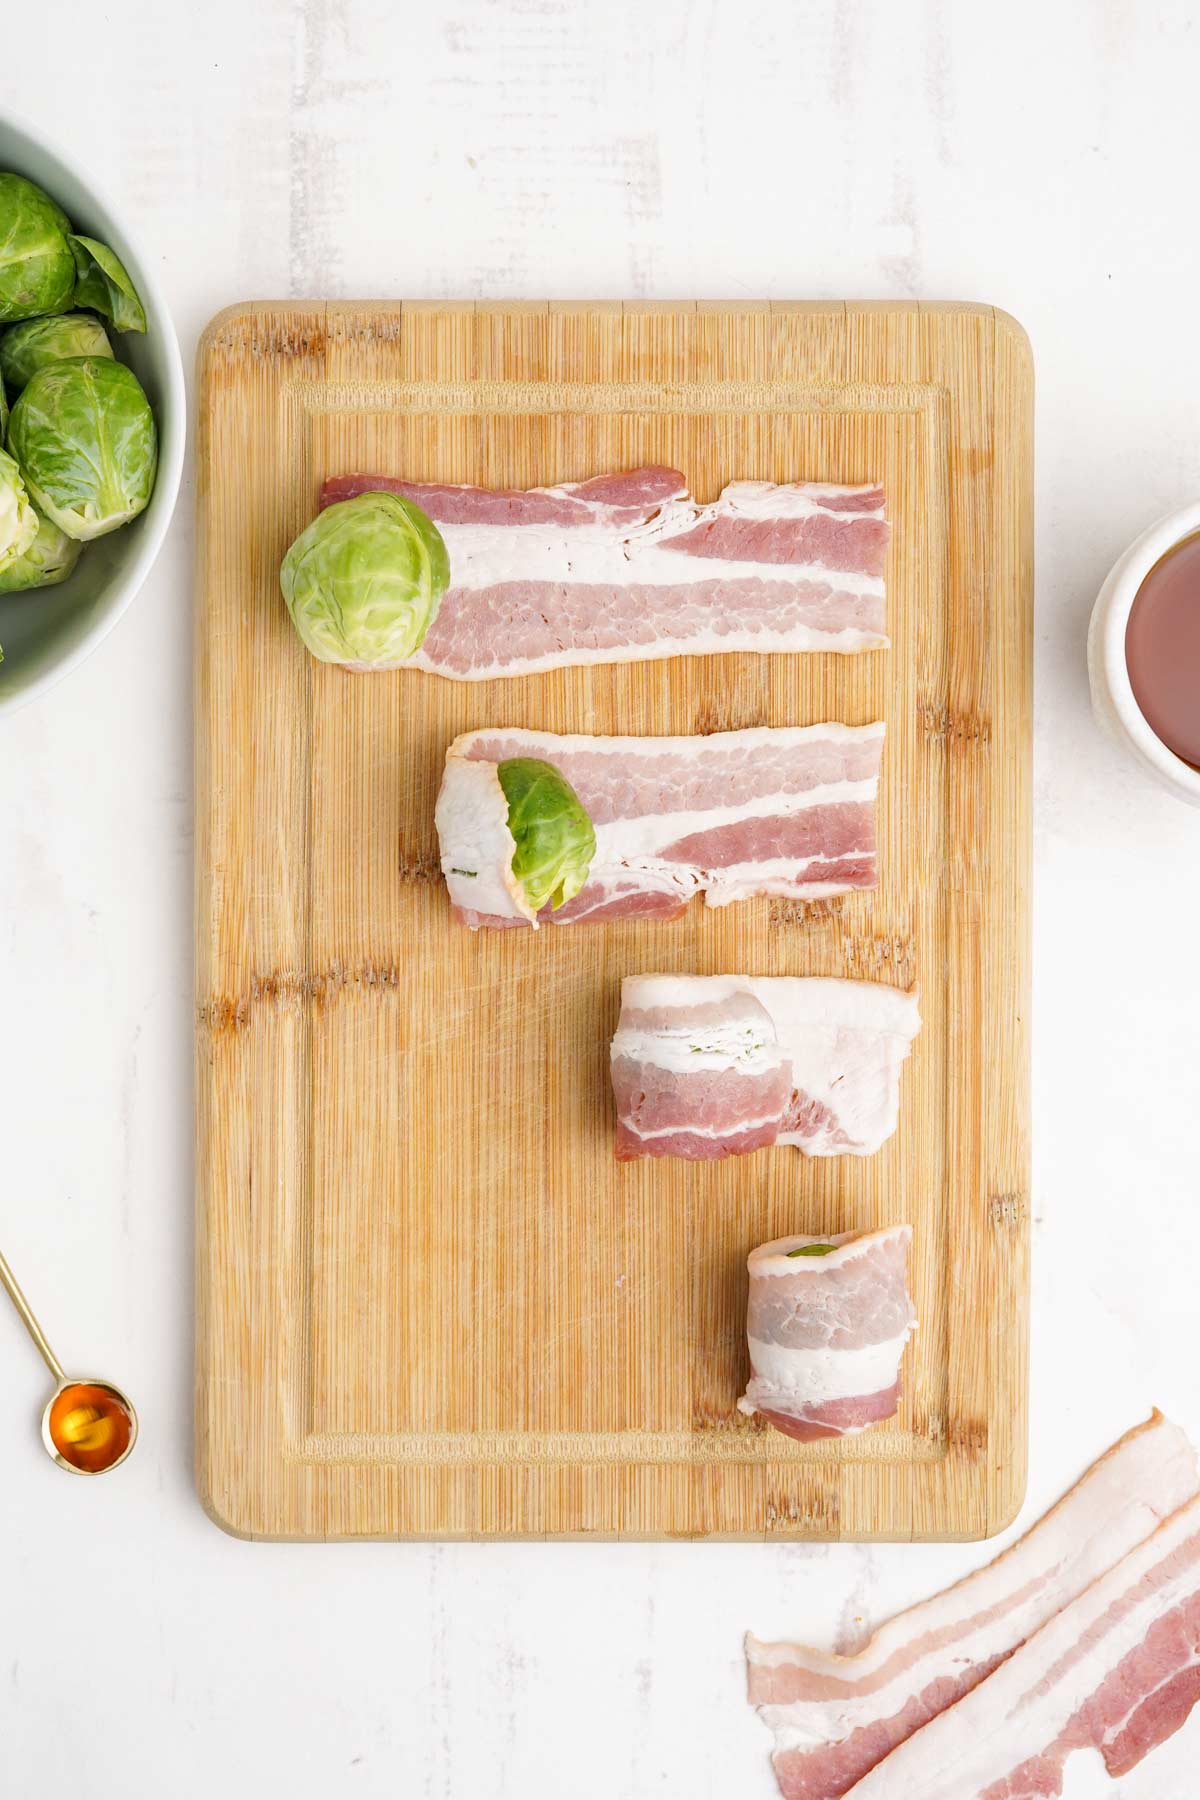 Brussel sprouts added to bacon strips and shown at various intervals of wrapping.